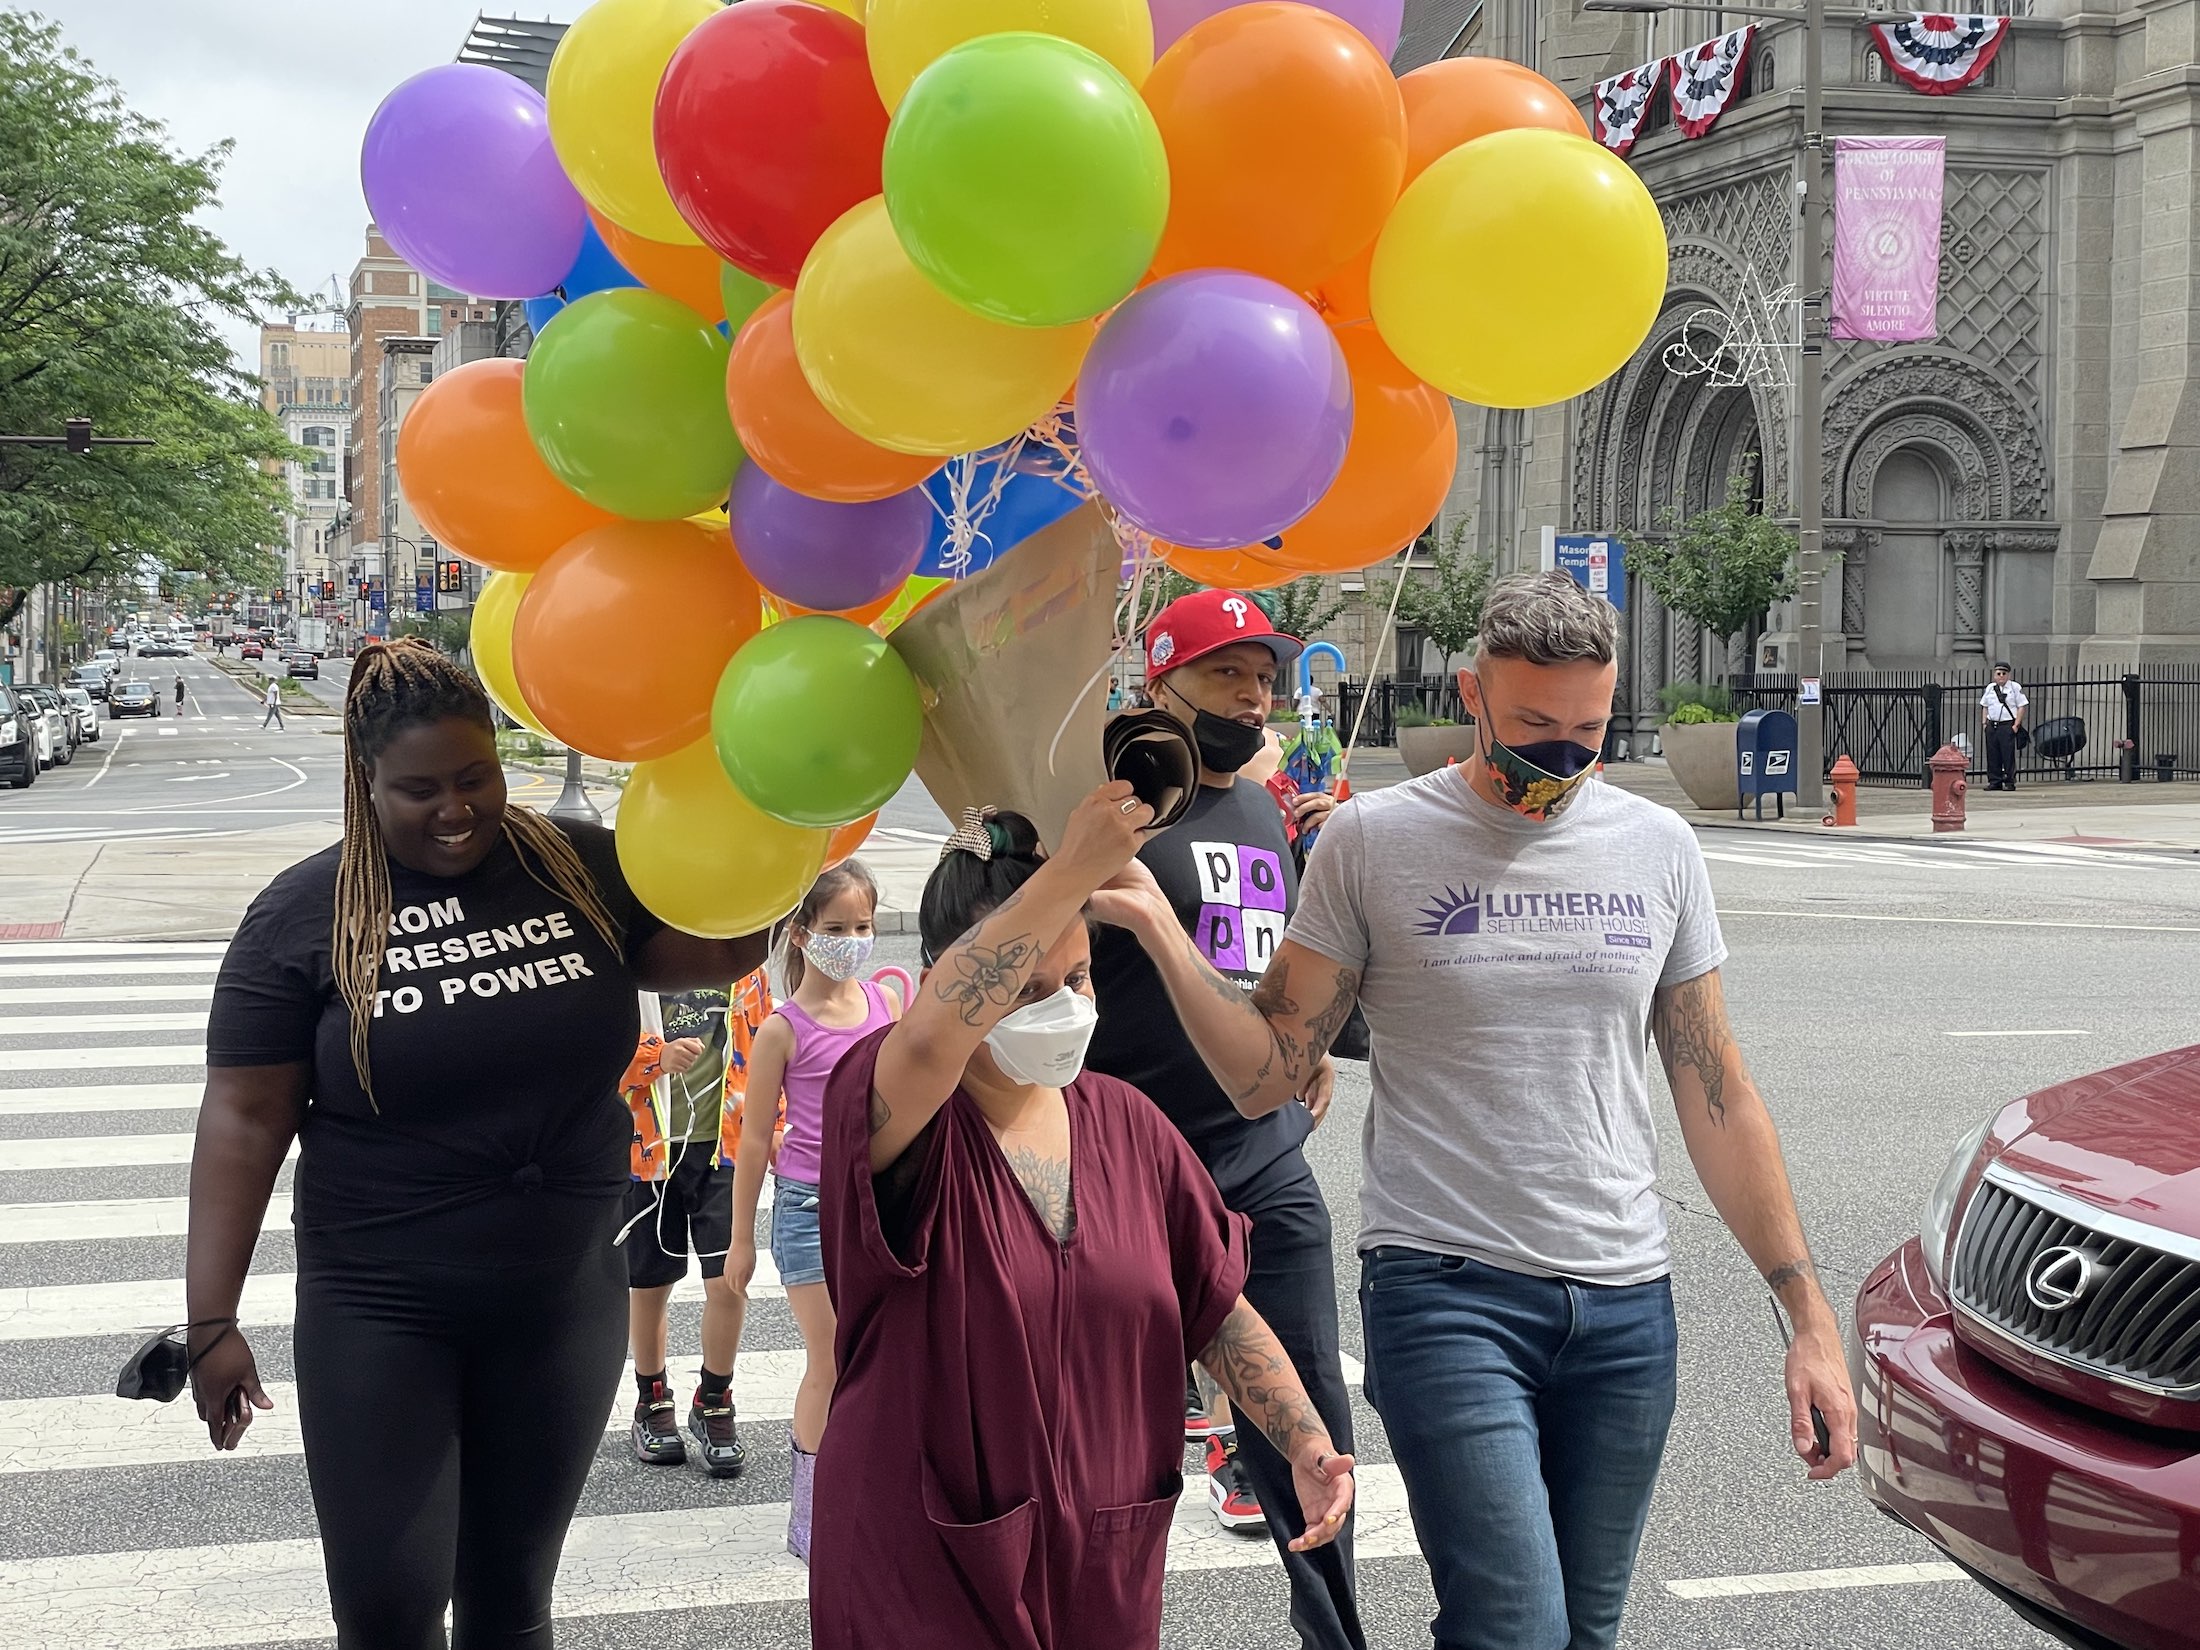 A crown of people walks with colorful balloons